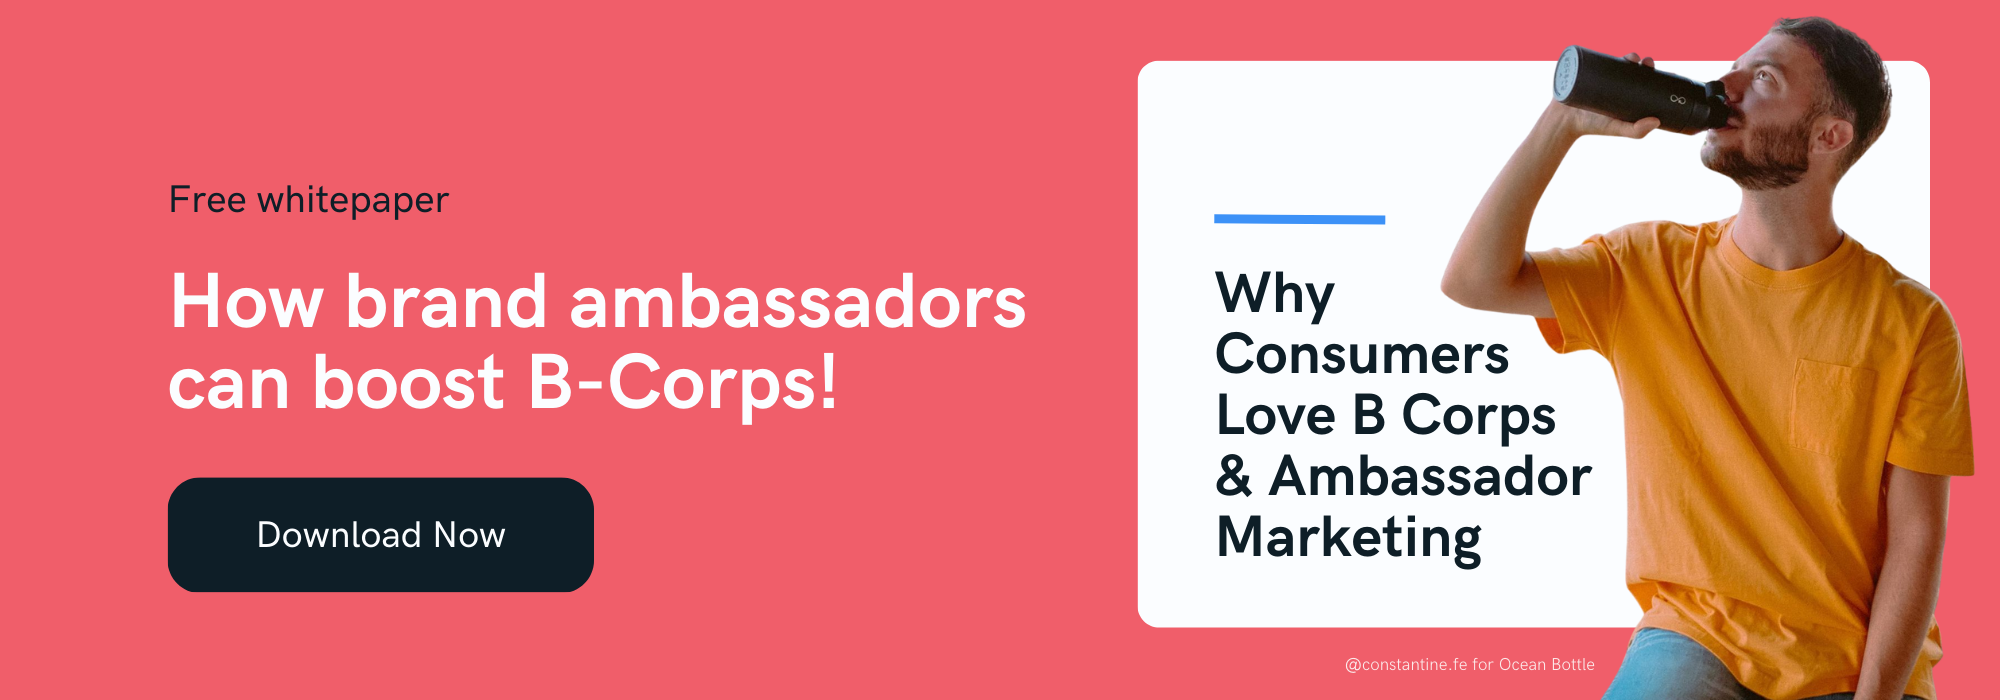 How brand ambassadors can boost B-Corps